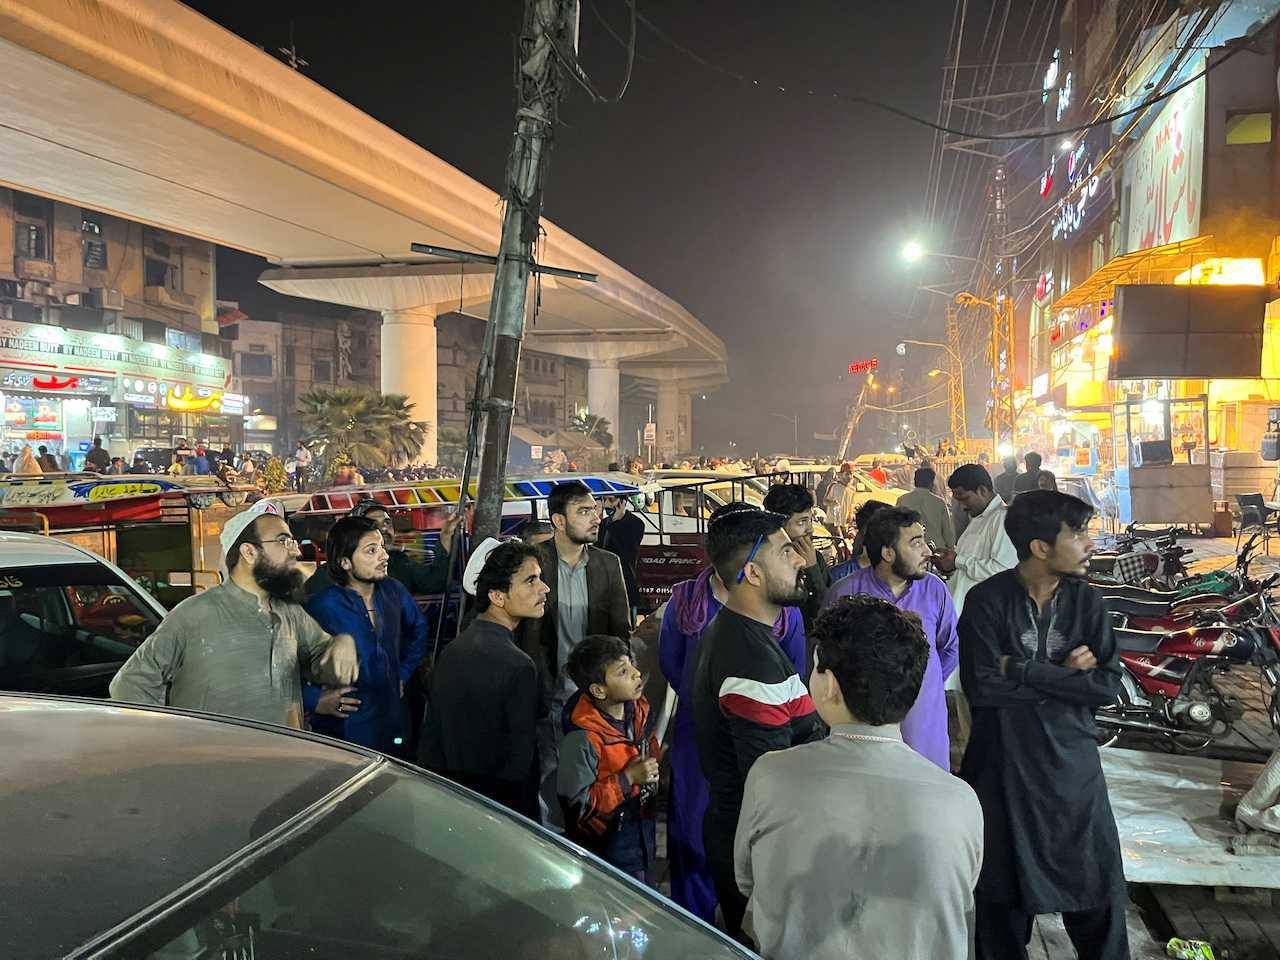 People come out of a restaurant after a tremor was felt in Lahore, Pakistan, March 21. Photo: Reuters